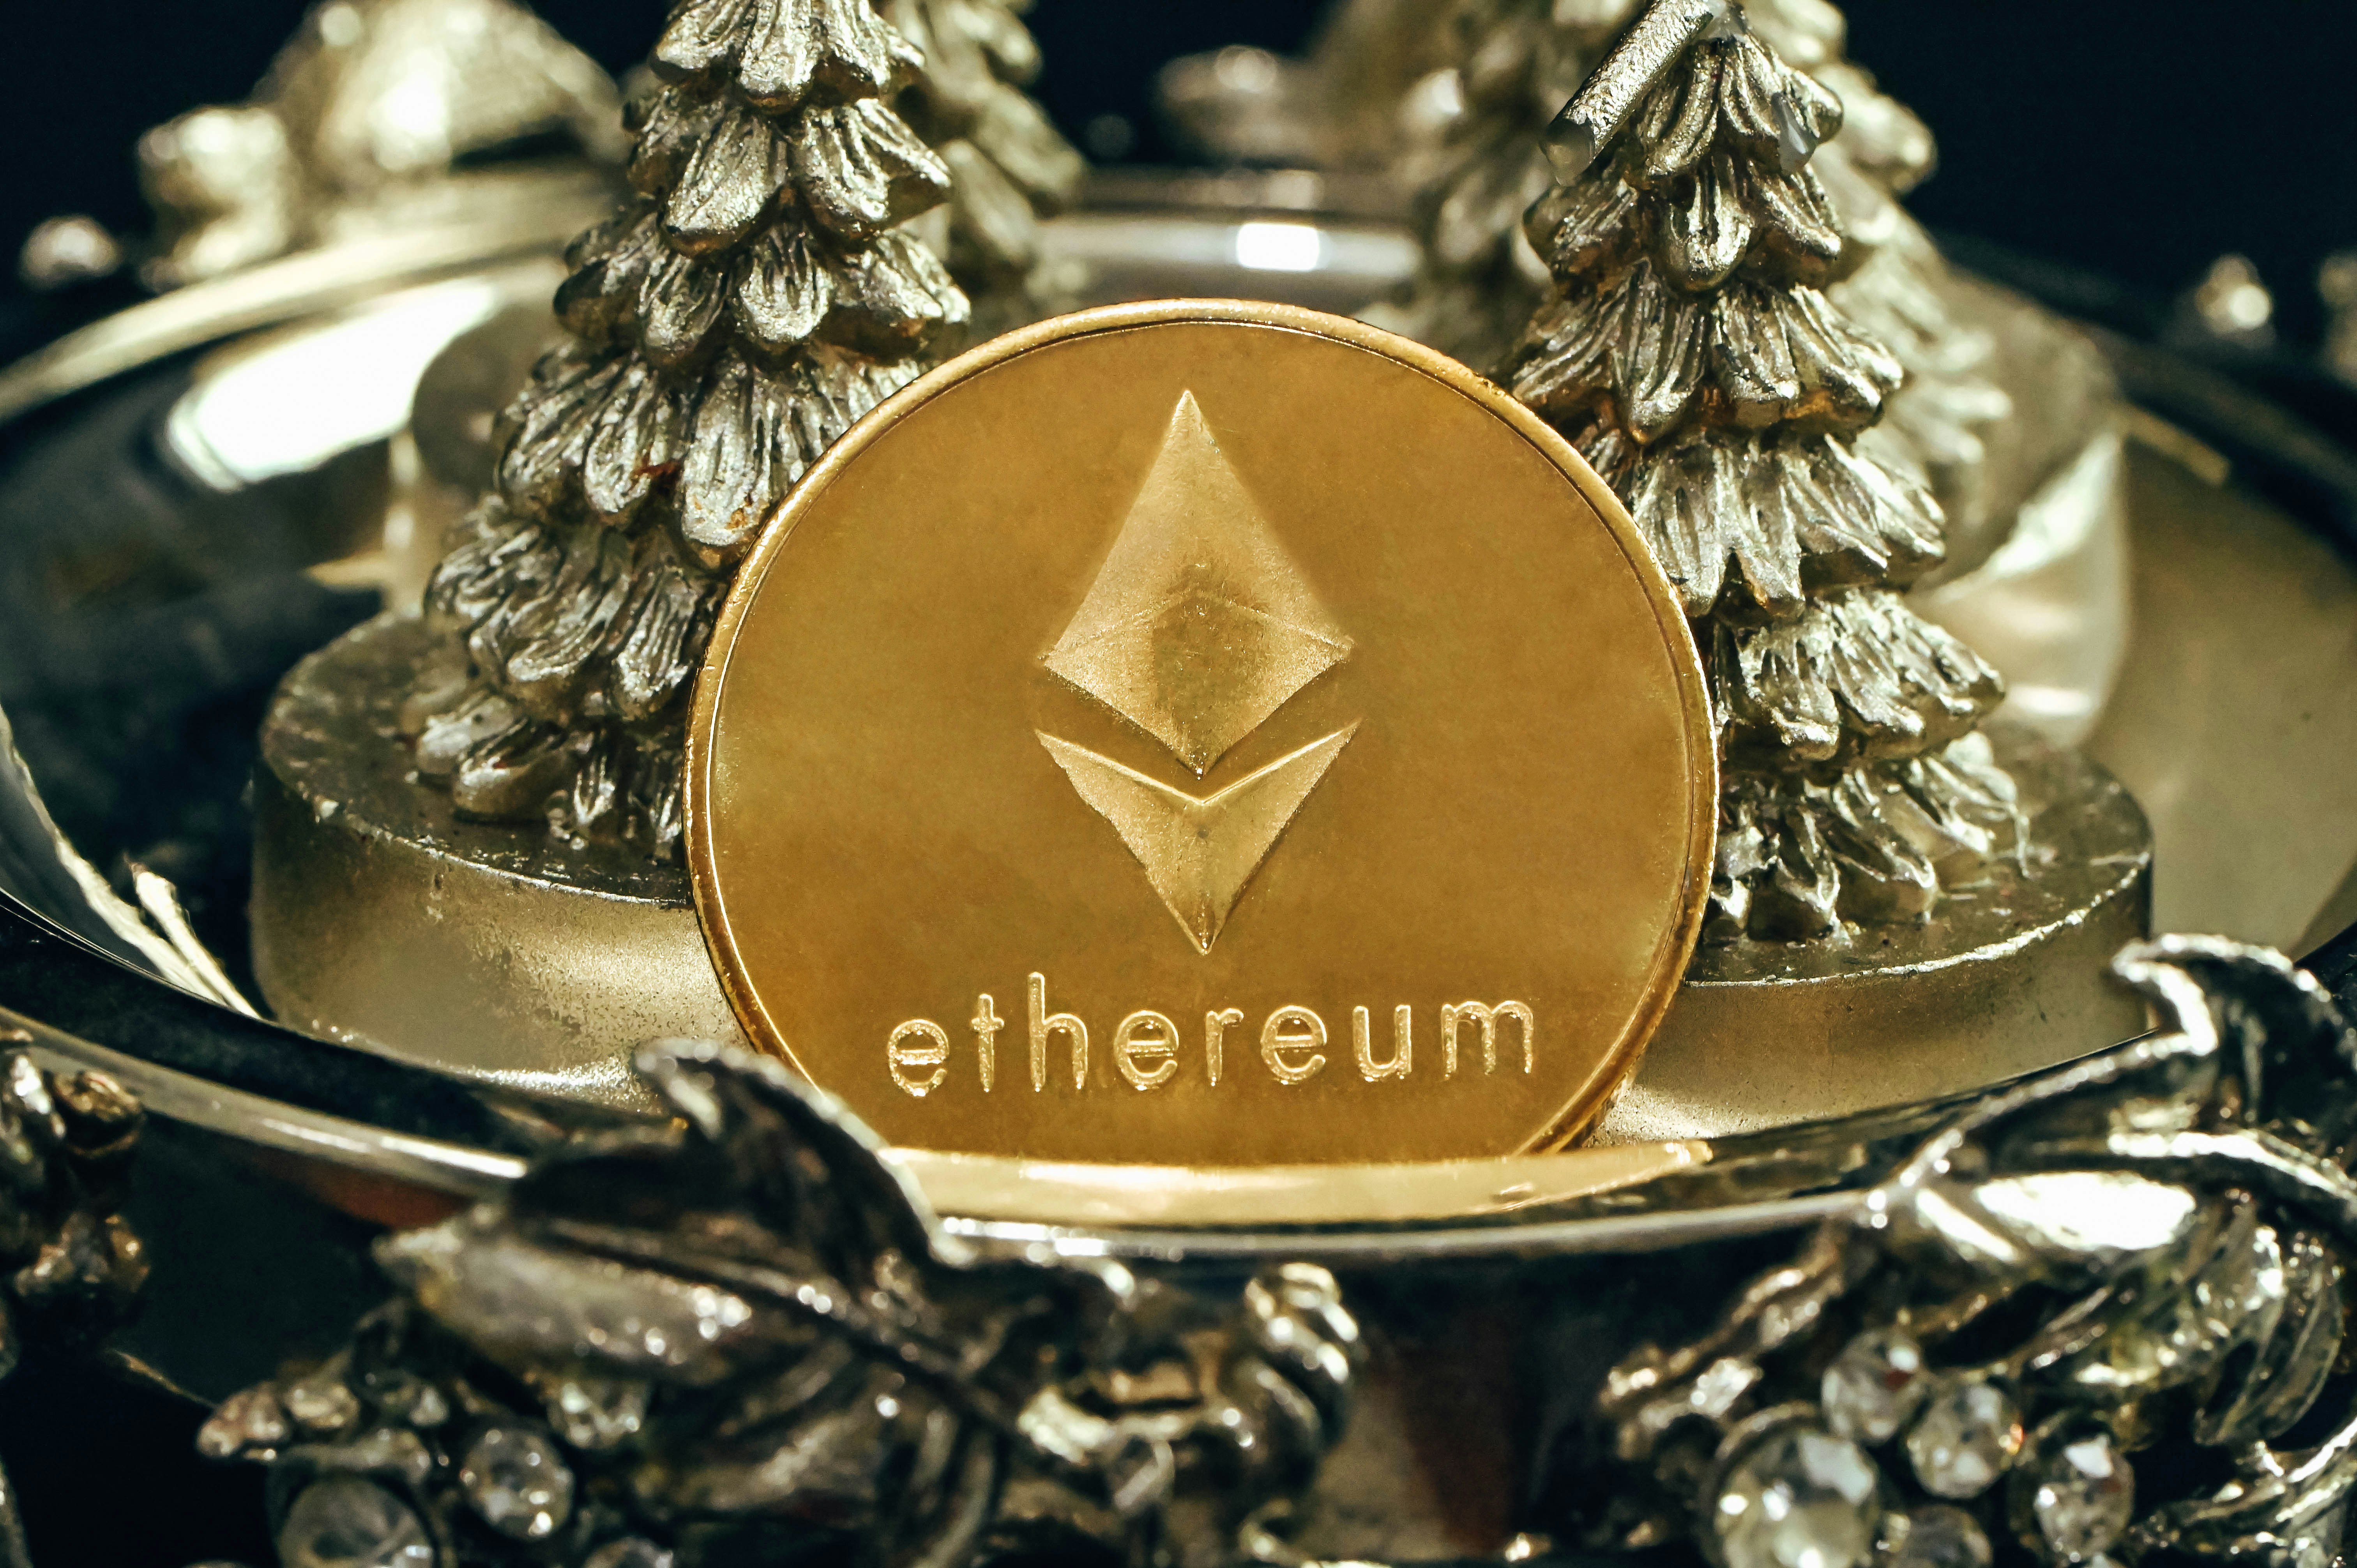 An Ethereum coin leaning on a pine tree